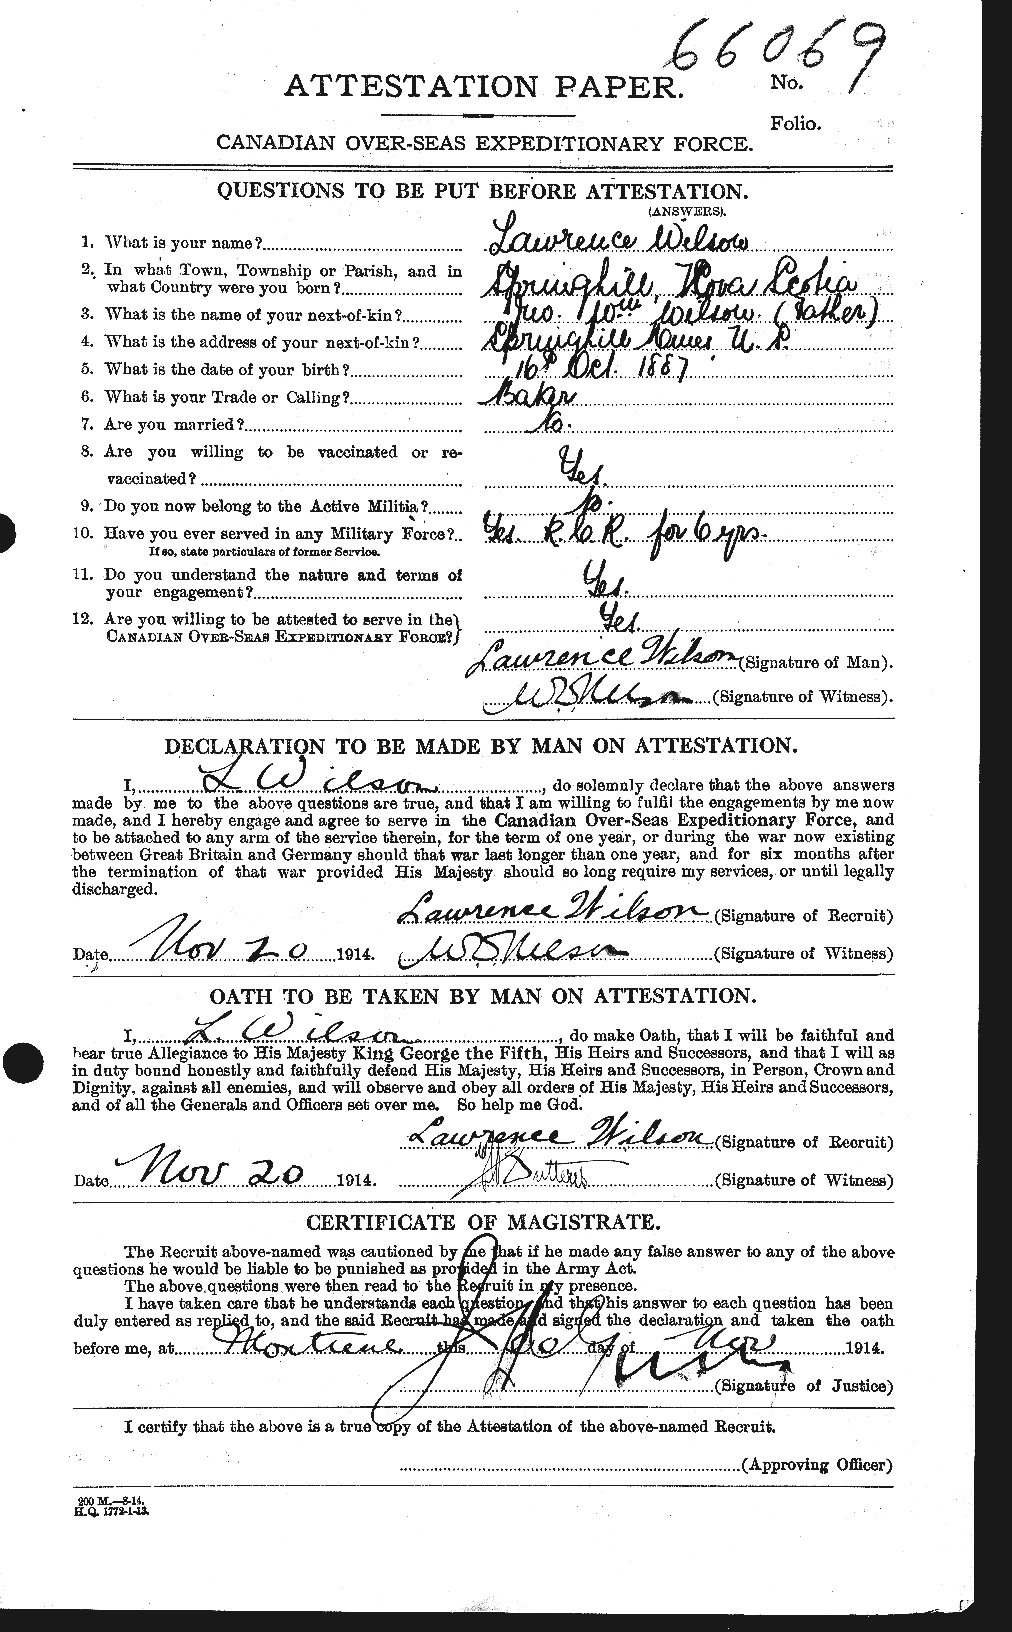 Personnel Records of the First World War - CEF 678618a